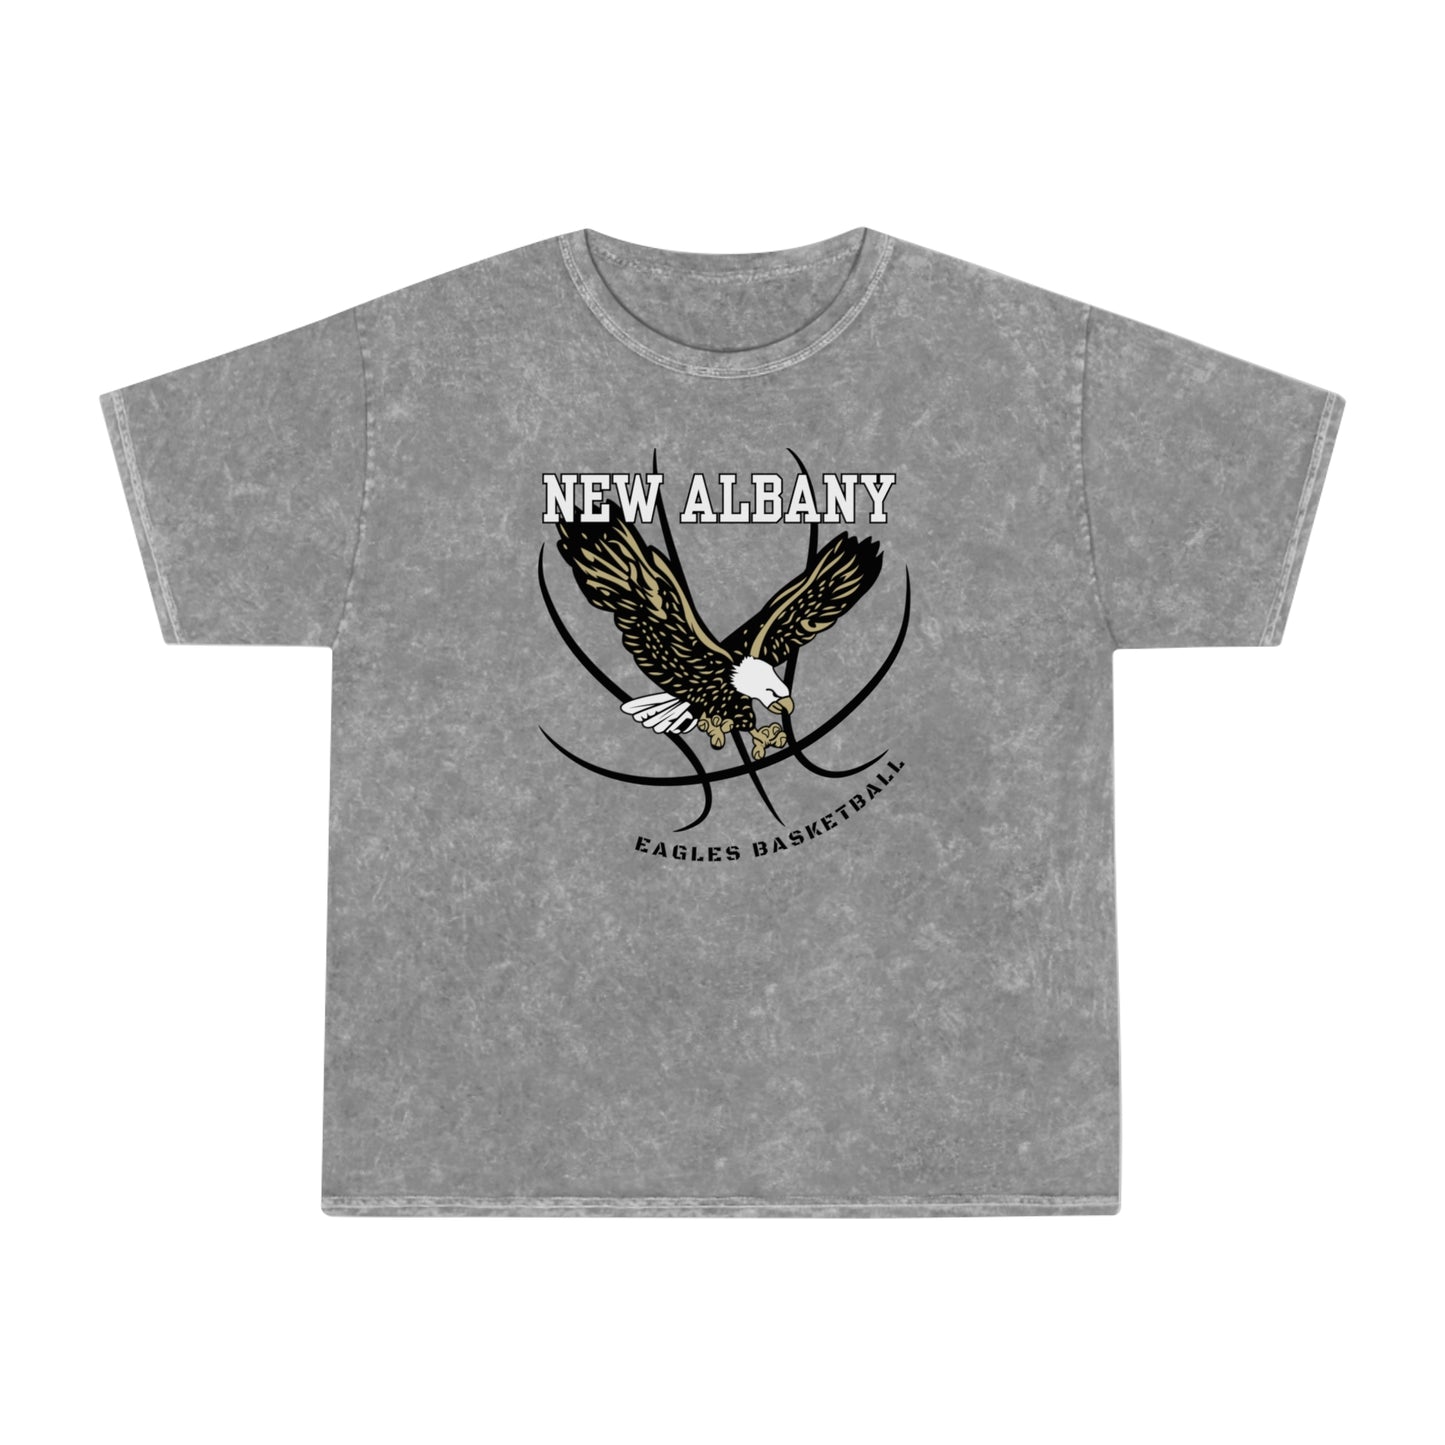 Adult Unisex Basketball Mineral Wash Short Sleeve Graphic Tee - New Albany Eagles